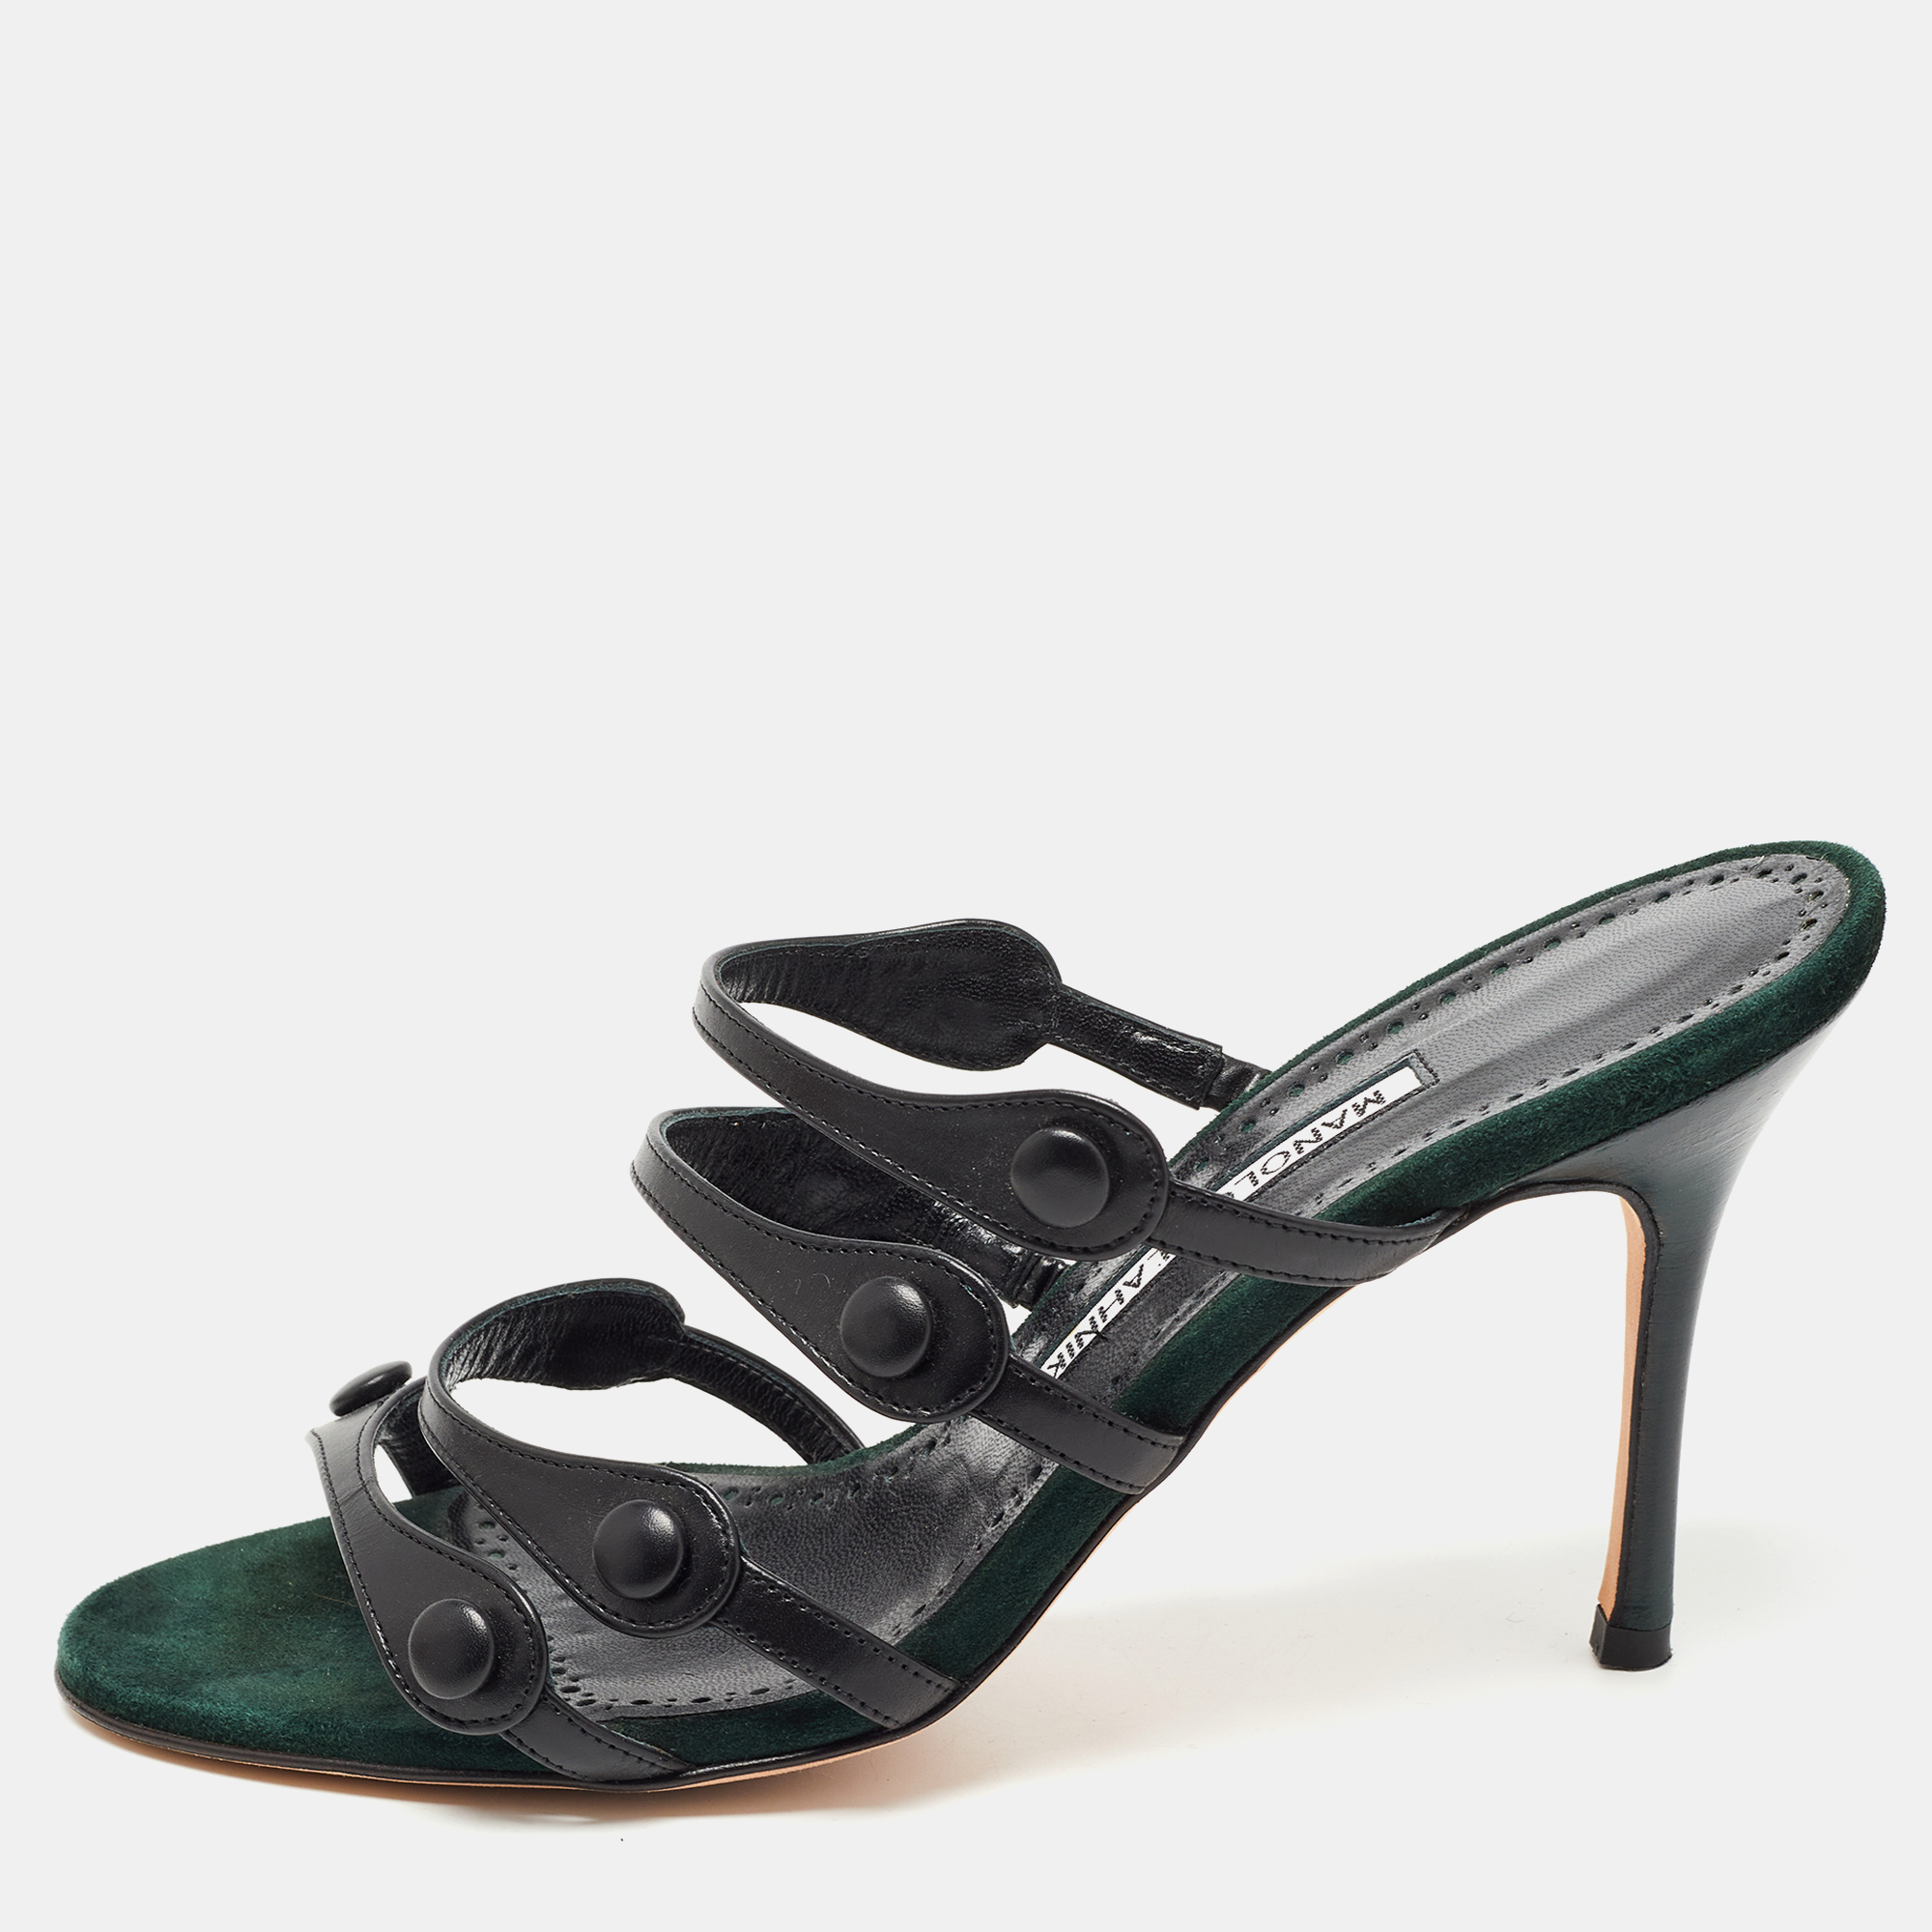 Pre-owned Manolo Blahnik Black Leather Strappy Slides Size 38